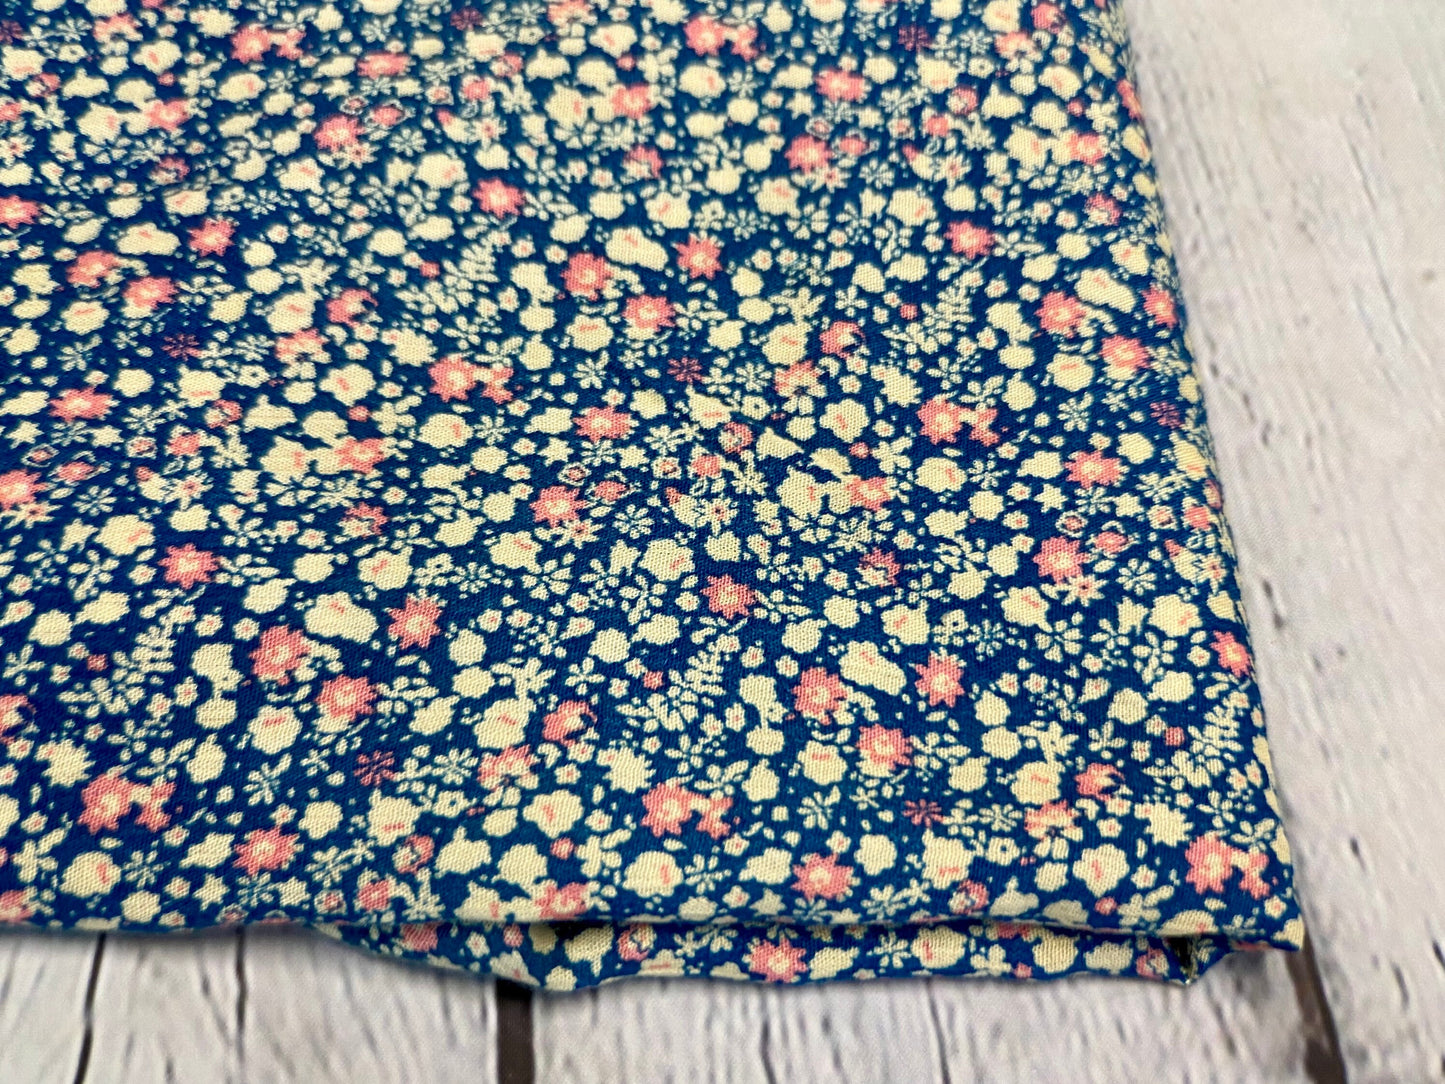 Rayon Challis Crinkled Woven Print Fabric By The Yard Small Mini Floral Print